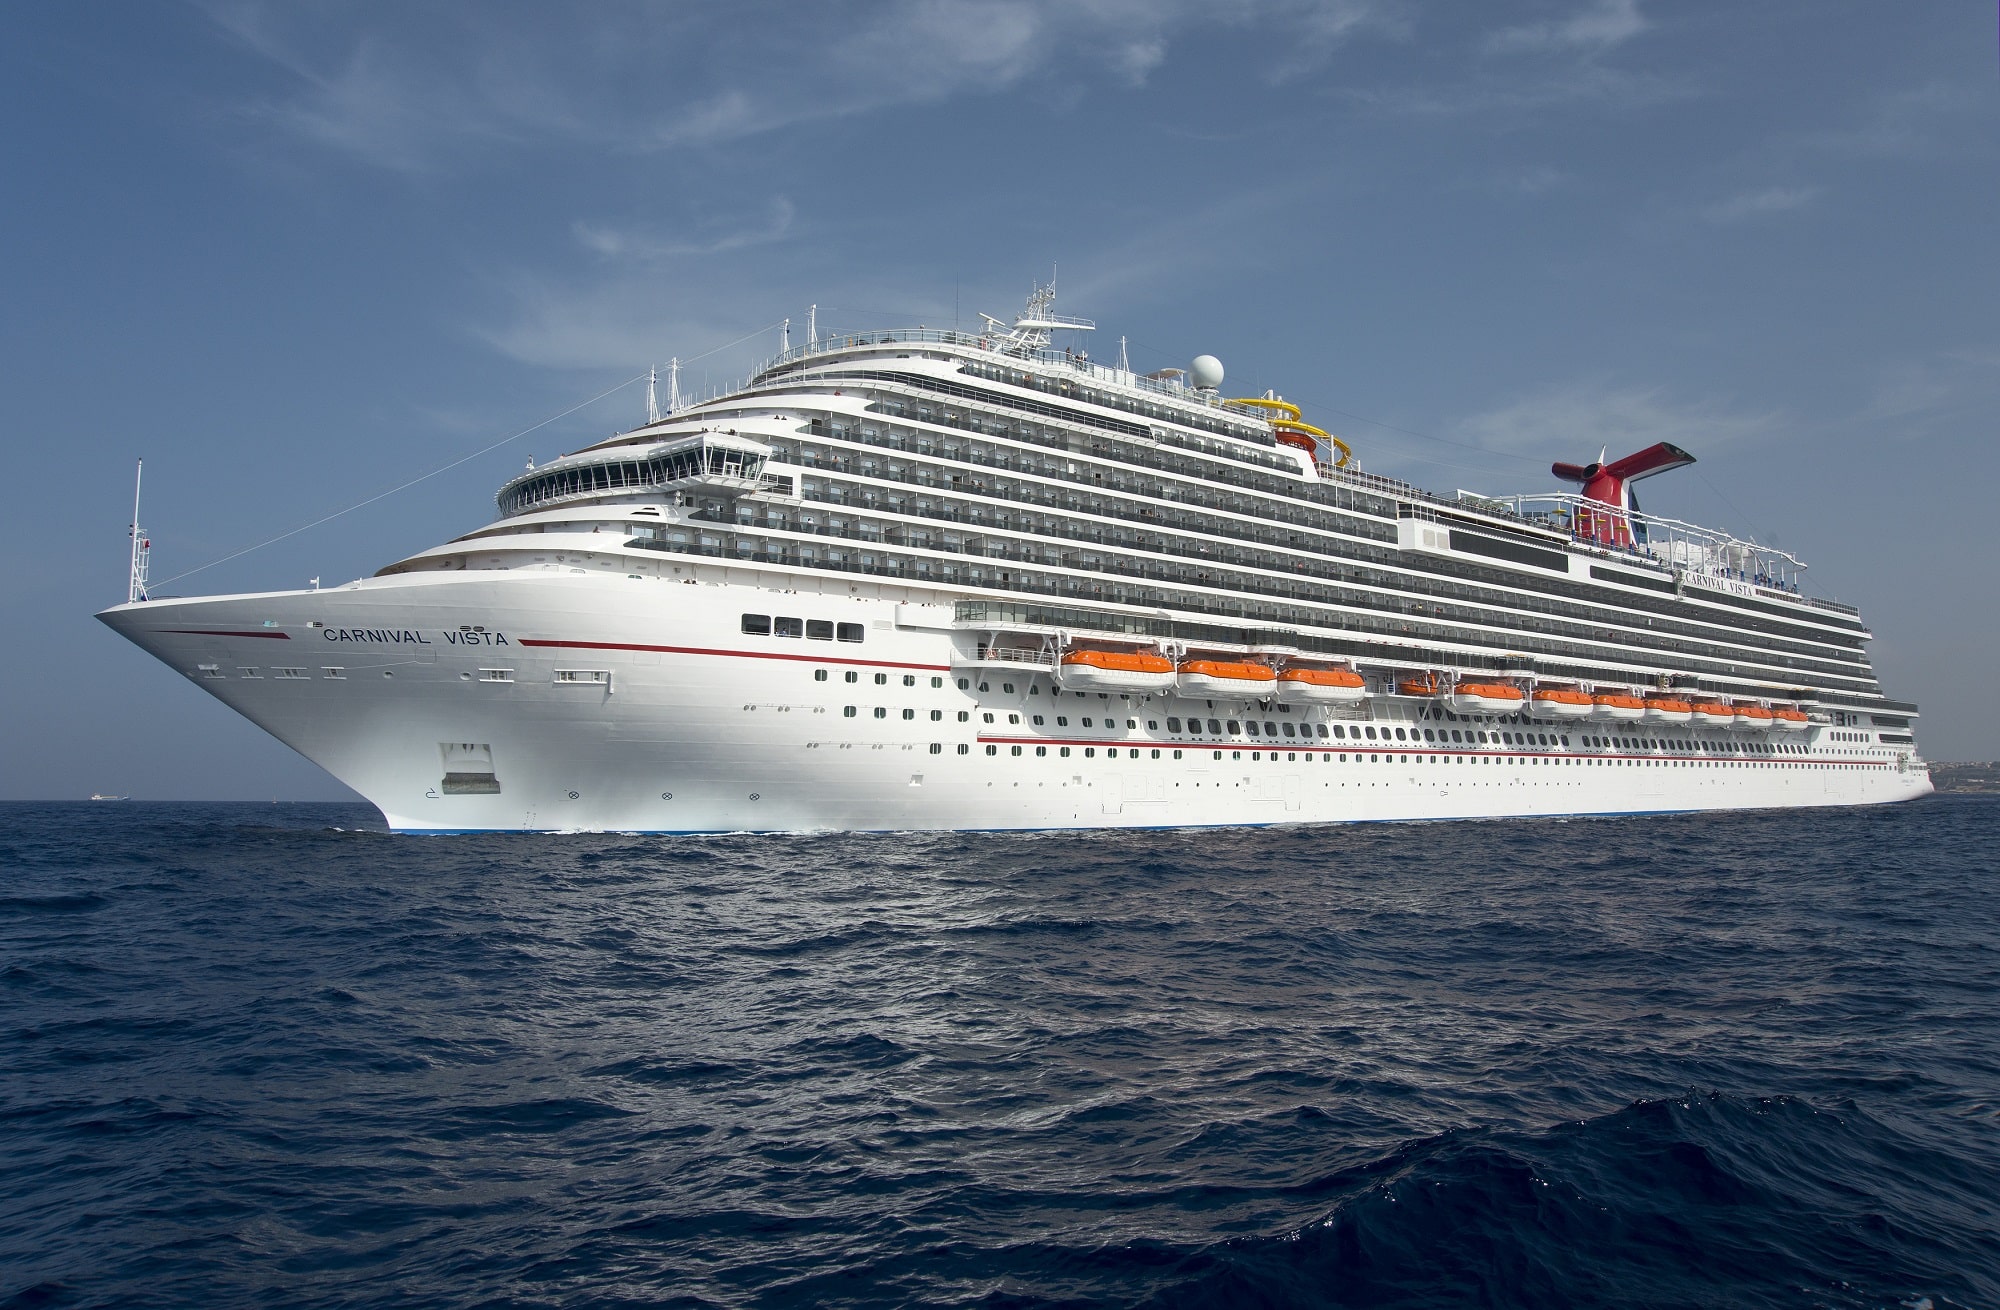 The Carnival Vista cruises at sea. The largest and most innovative cruise vessel in Carnival Cruise Line's fleet,